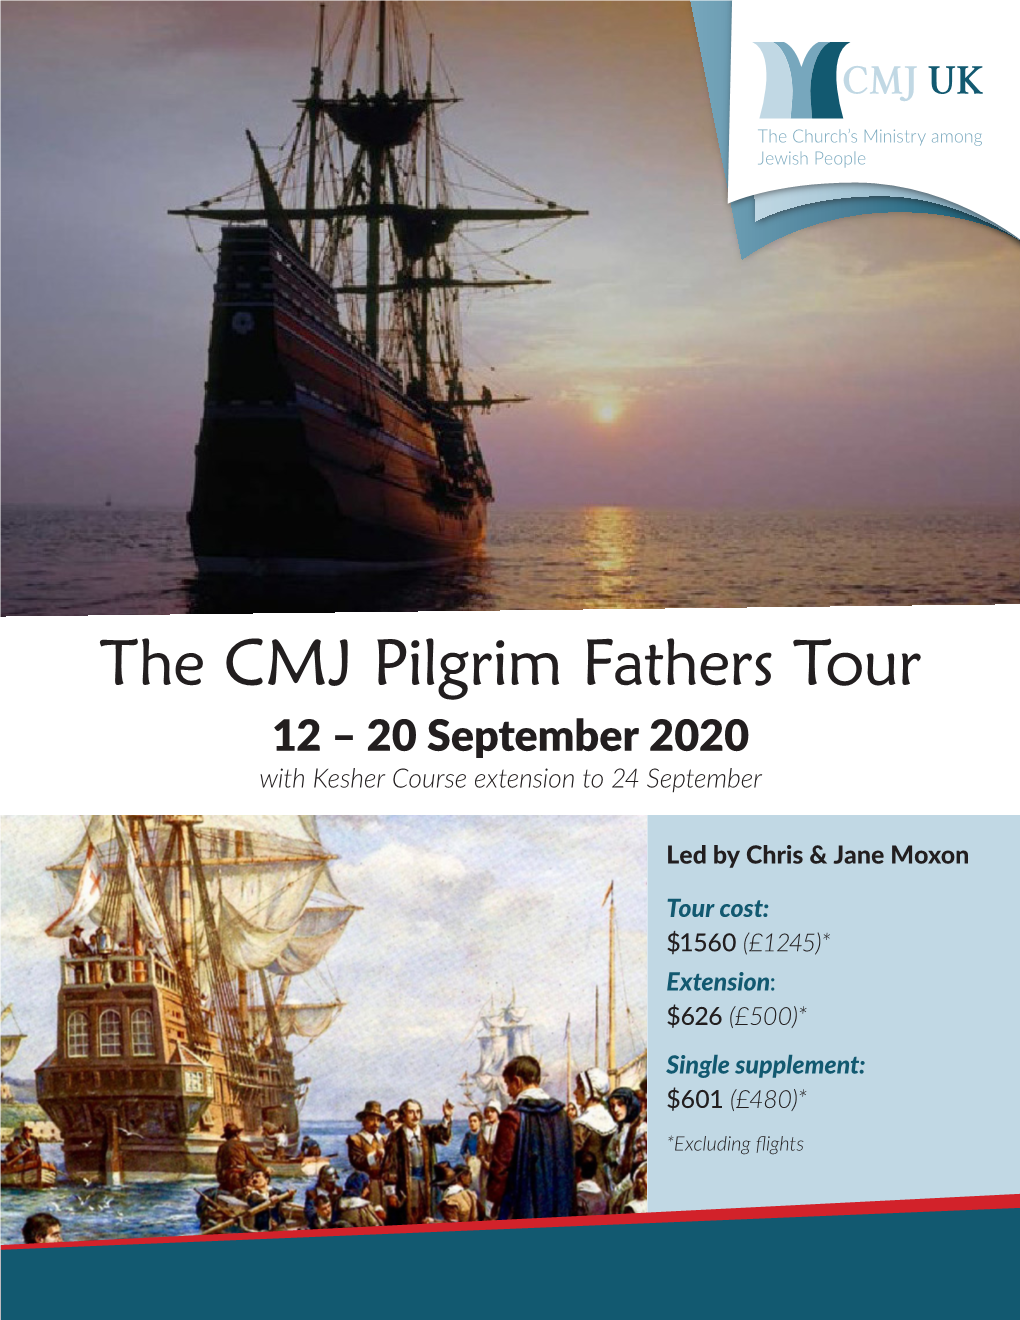 The CMJ Pilgrim Fathers Tour 12 – 20 September 2020 with Kesher Course Extension to 24 September